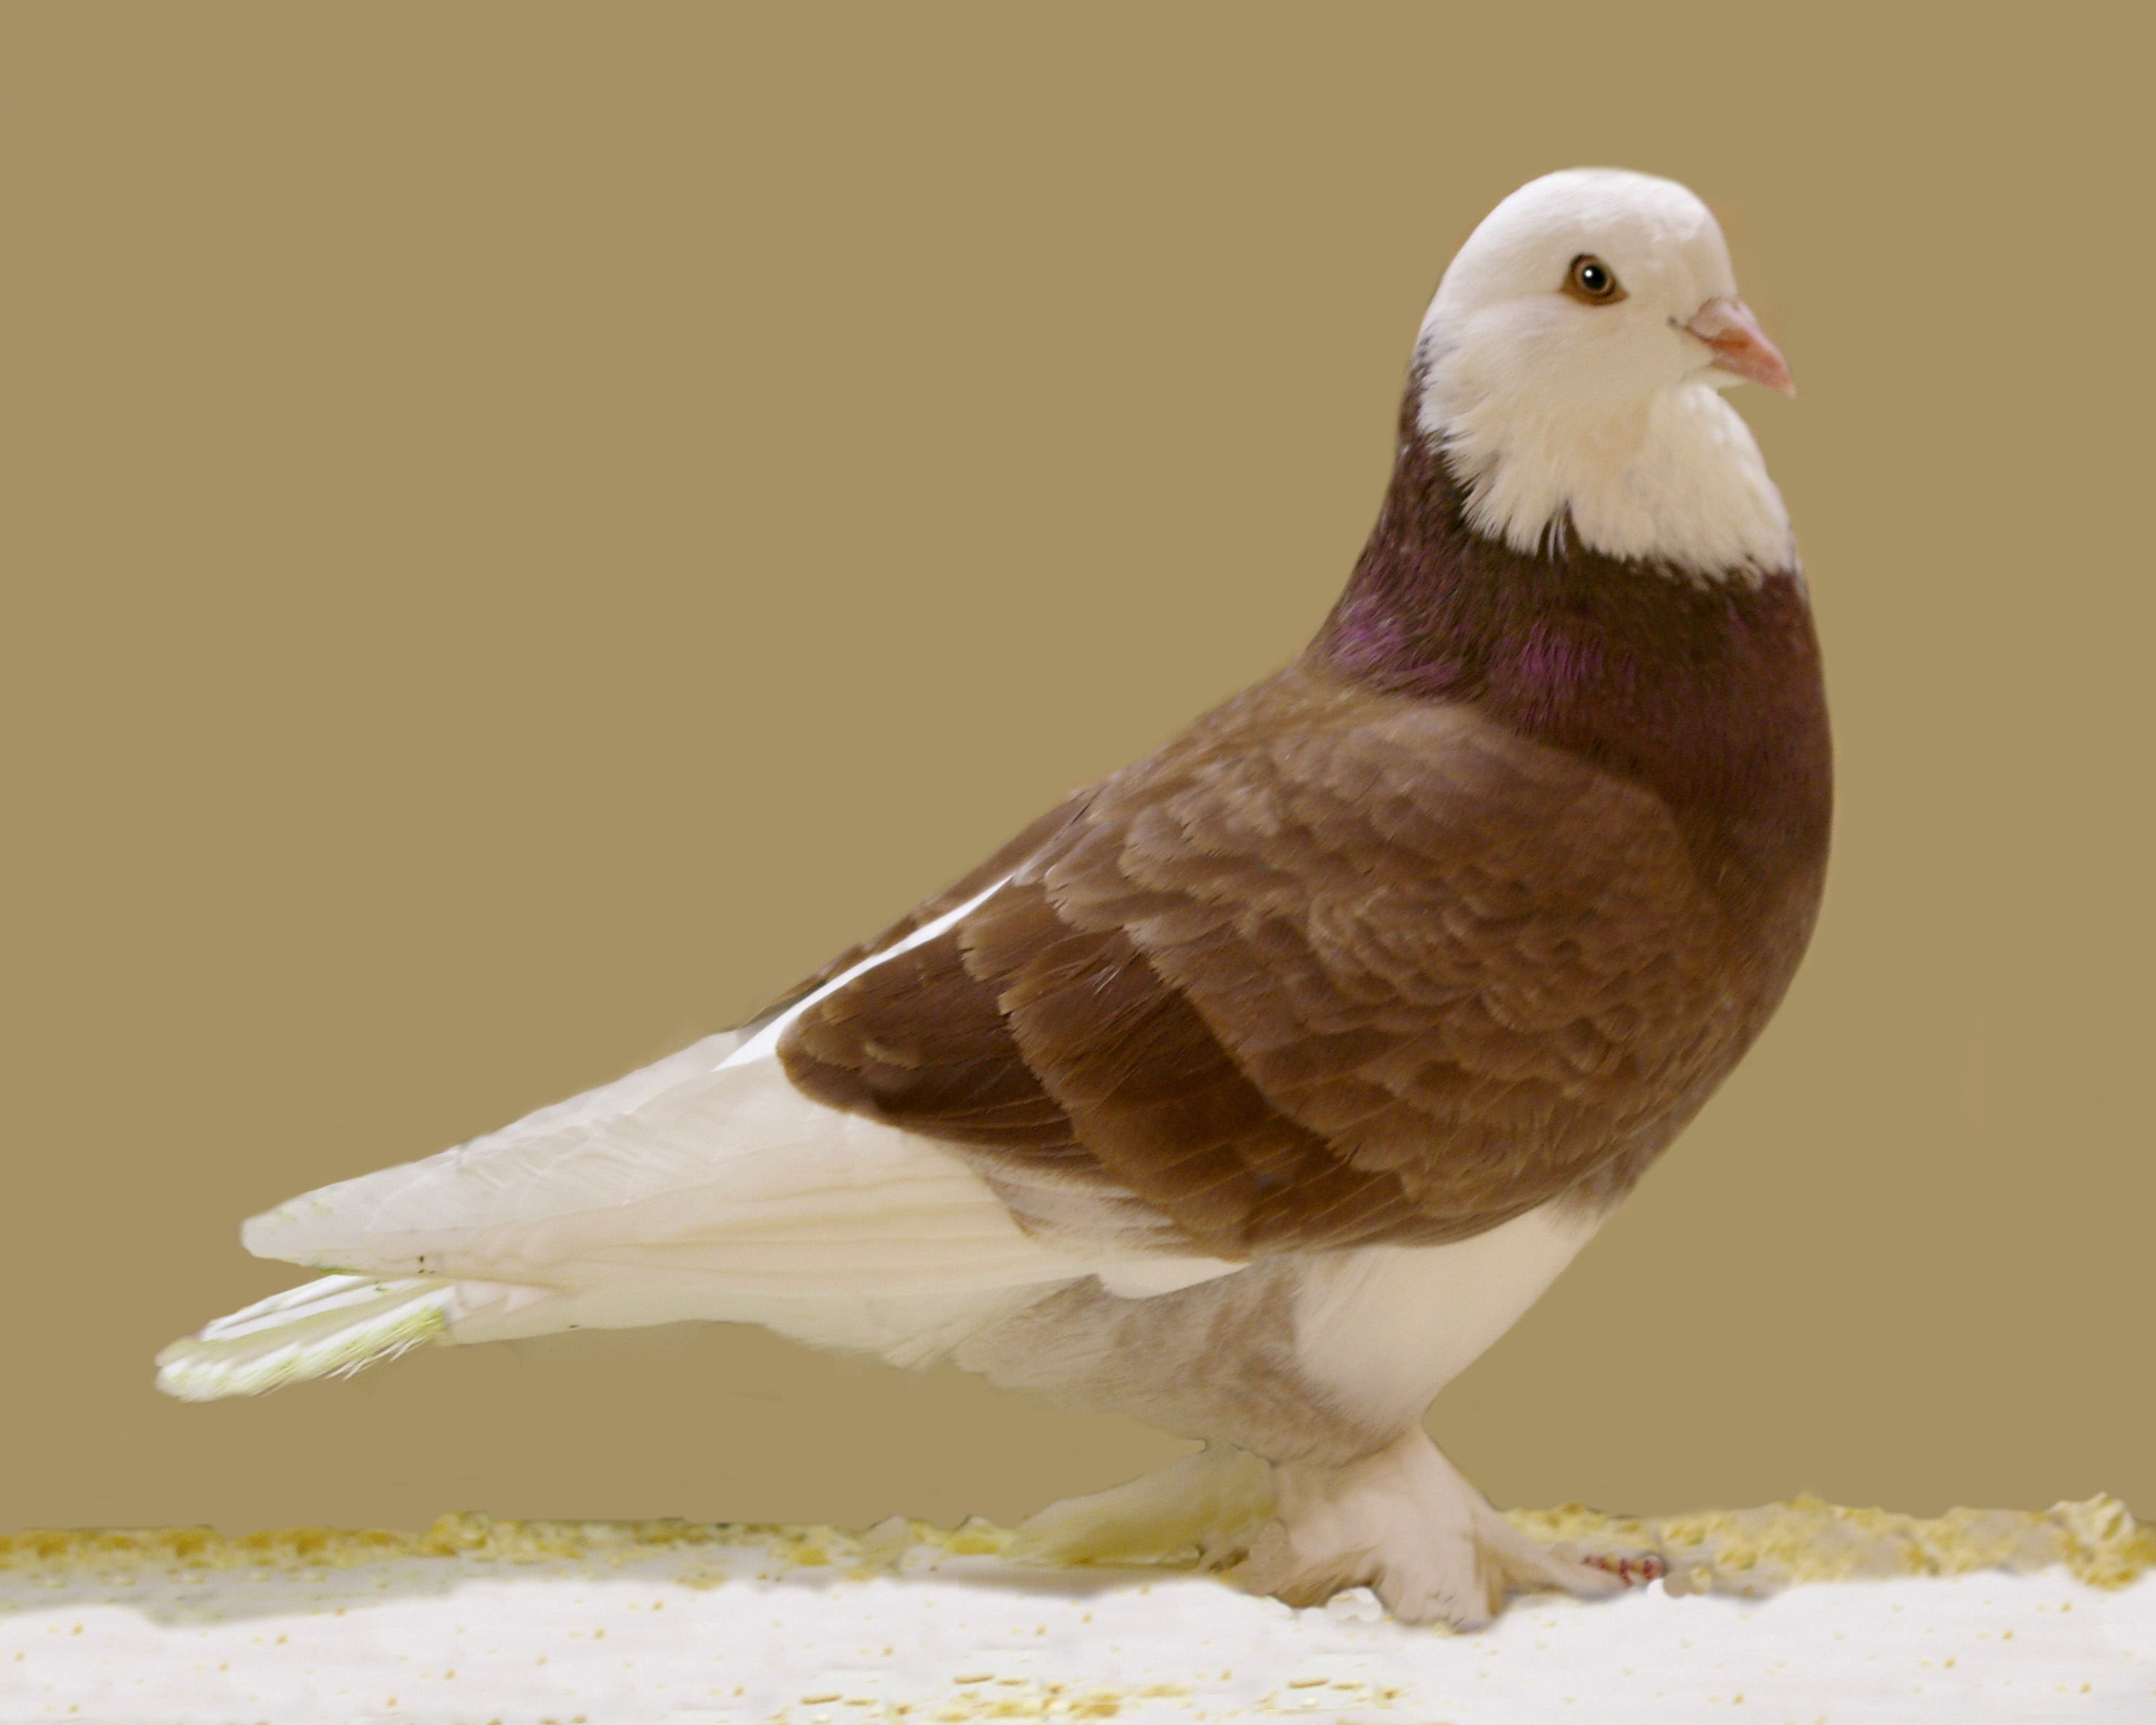 pigeons tumbler in pigeon breeds England originating Domesticated